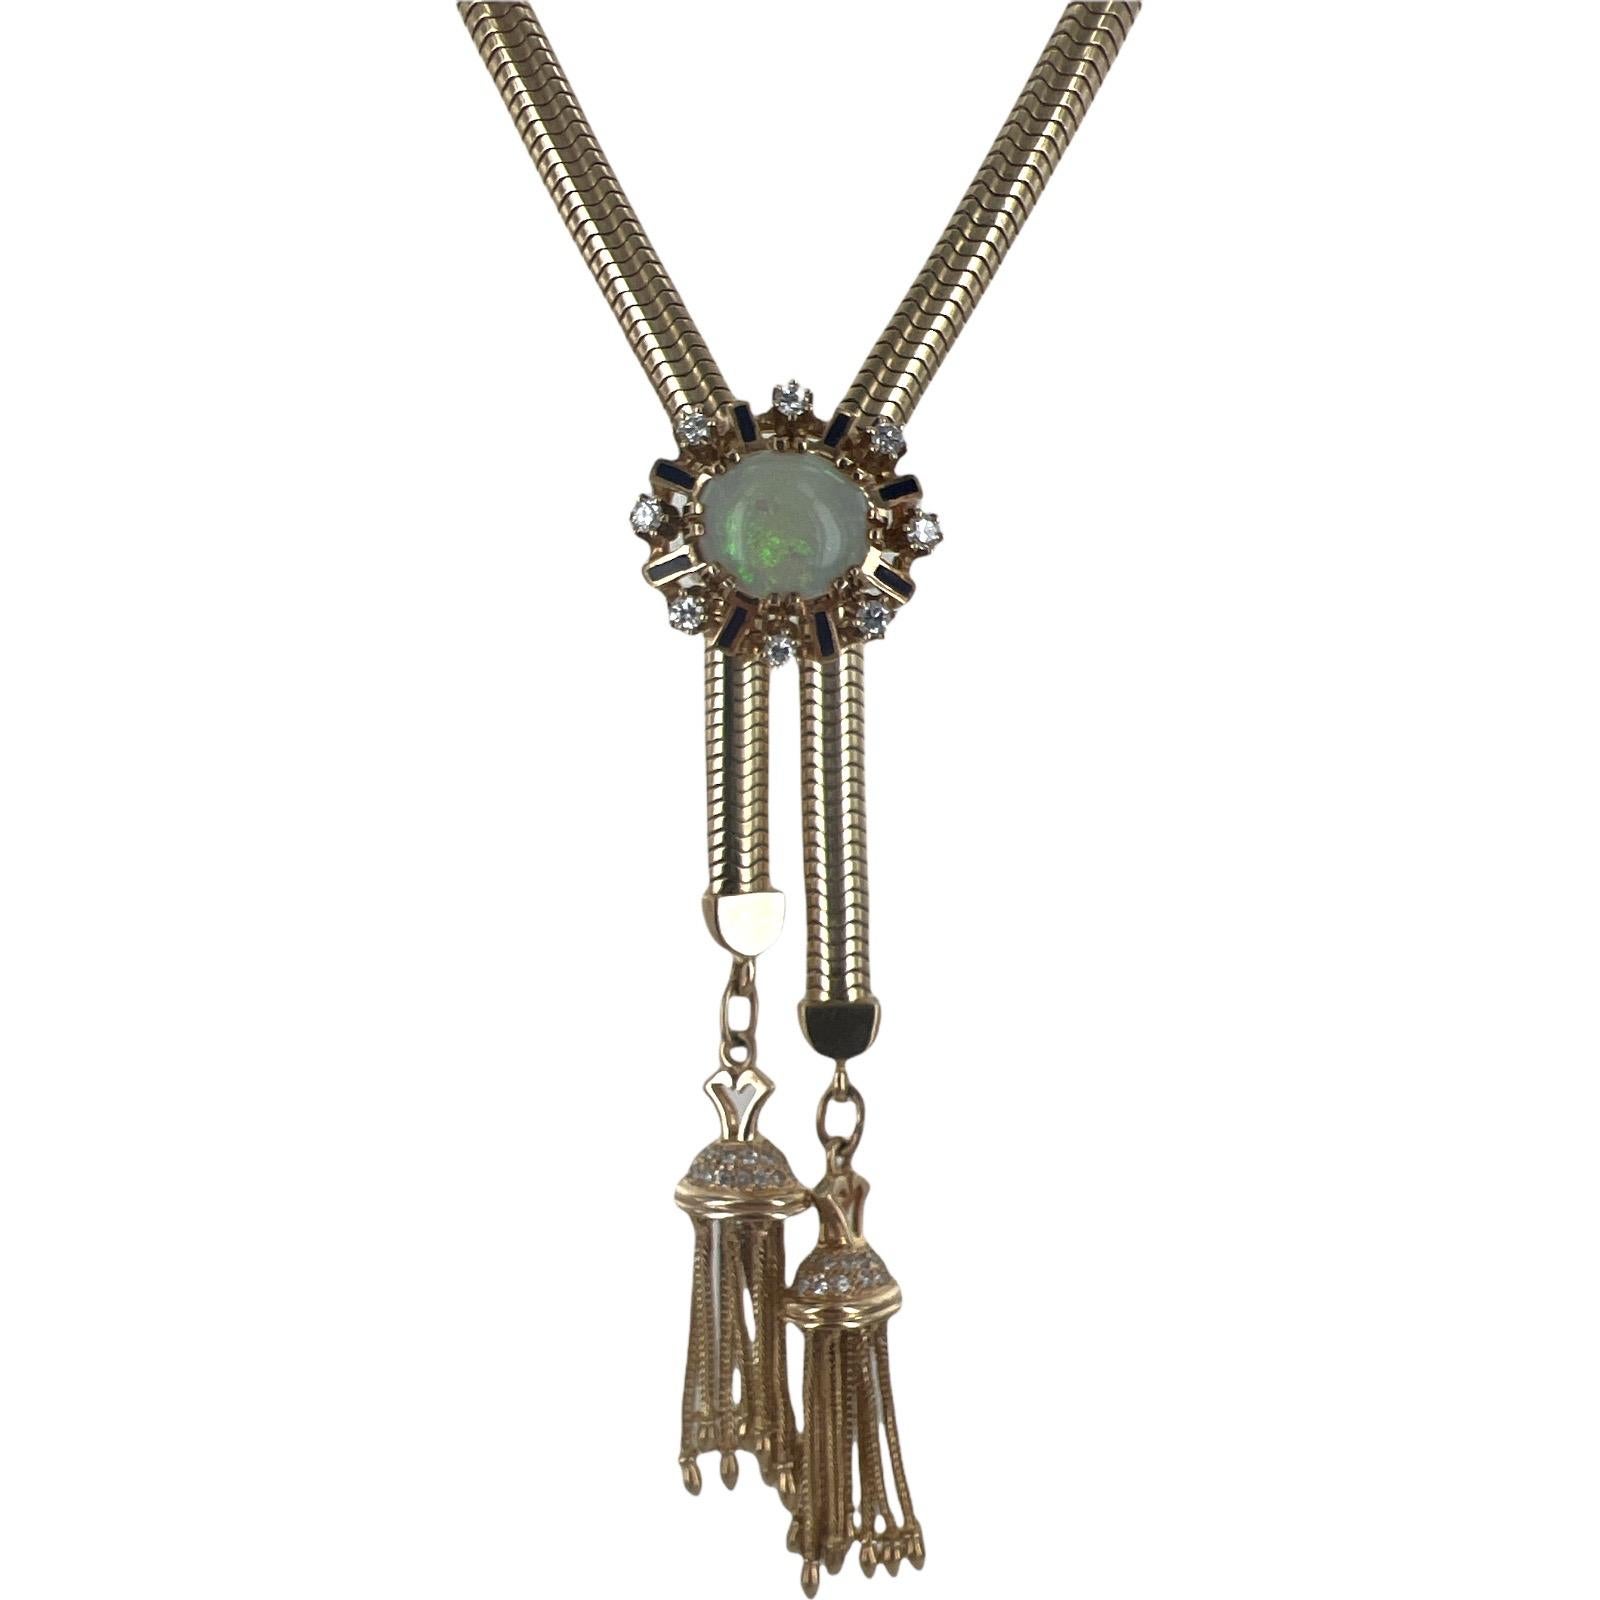 Fabulous vintage lariat tassel necklace fashioned in 14 karat yellow gold. The adjustable necklace features diamond endcaps with tassel drops. The center pendant features an oval opal, enamel, and 10 round brilliant cut diamonds. The diamonds all